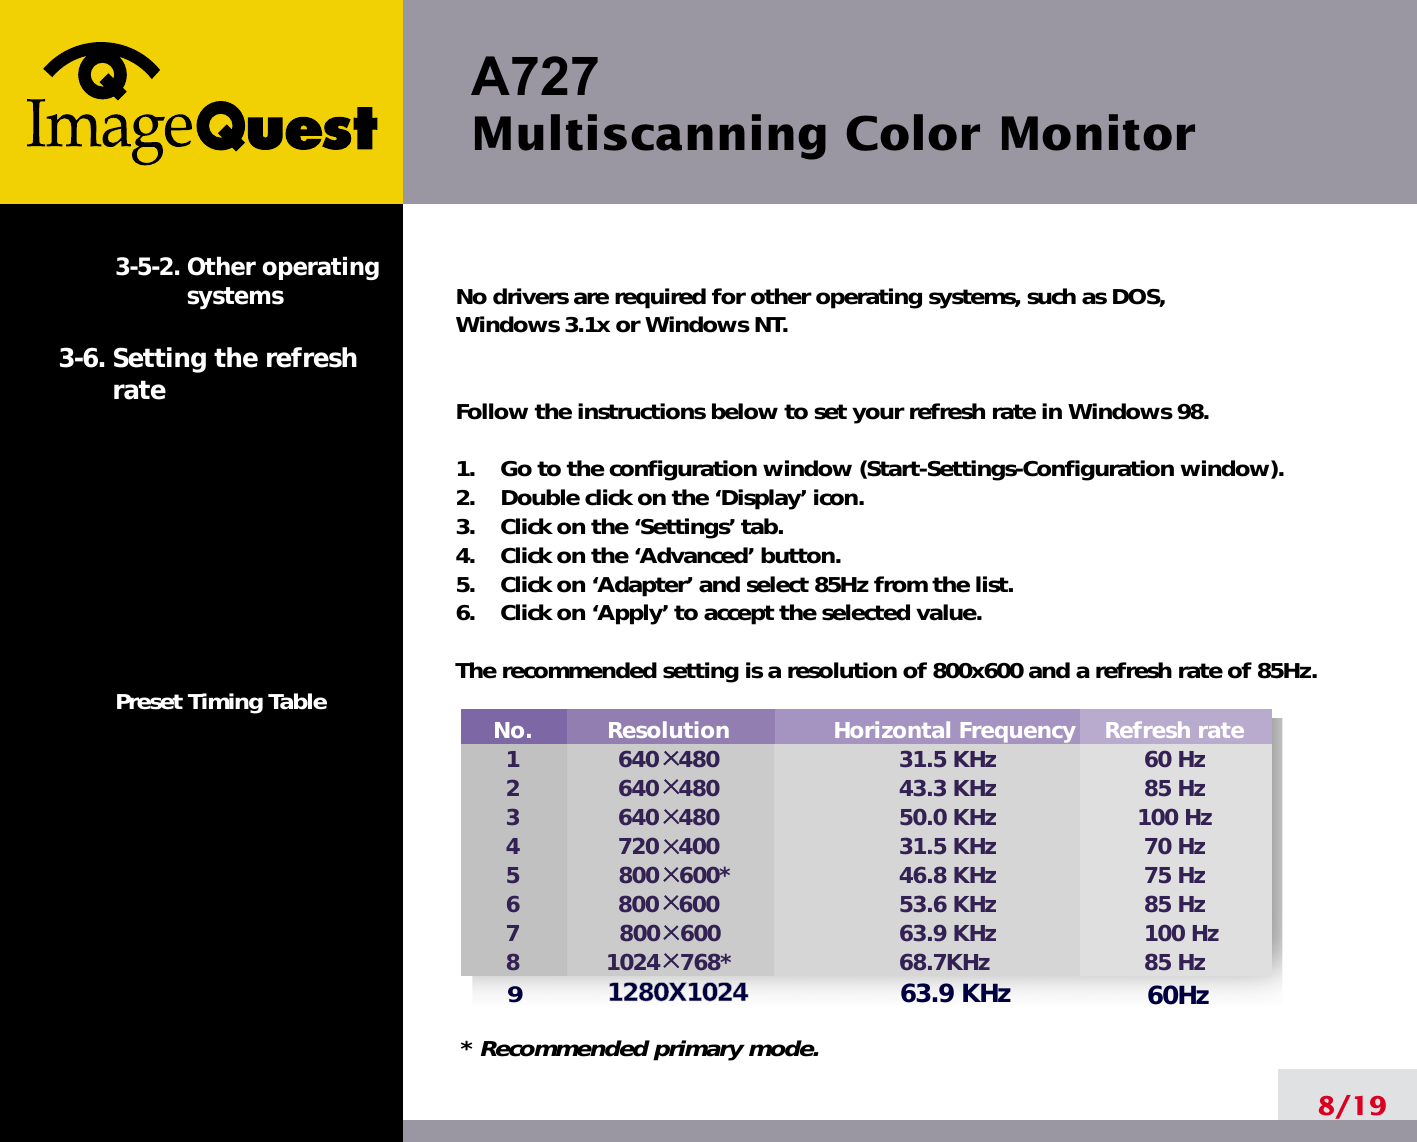 A727 Multiscanning Color Monitor8/193-5-2. Other operatingsystems3-6. Setting the refreshratePreset Timing TableNo drivers are required for other operating systems, such as DOS, Windows 3.1x or Windows NT.Follow the instructions below to set your refresh rate in Windows 98.1.    Go to the configuration window (Start-Settings-Configuration window).2.    Double click on the ‘Display’ icon.3.    Click on the ‘Settings’ tab.4.    Click on the ‘Advanced’ button.5.    Click on ‘Adapter’ and select 85Hz from the list.6.    Click on ‘Apply’ to accept the selected value.The recommended setting is a resolution of 800x600 and a refresh rate of 85Hz. * Recommended primary mode.No.12345678Resolution640   480640   480640   480720   400800   600*800   600  800   6001024   768*Horizontal Frequency31.5 KHz43.3 KHz50.0 KHz31.5 KHz46.8 KHz53.6 KHz63.9 KHz68.7KHzRefresh rate60 Hz85 Hz100 Hz70 Hz75 Hz 85 Hz100 Hz85 Hz91280X102463.9 KHz60Hz